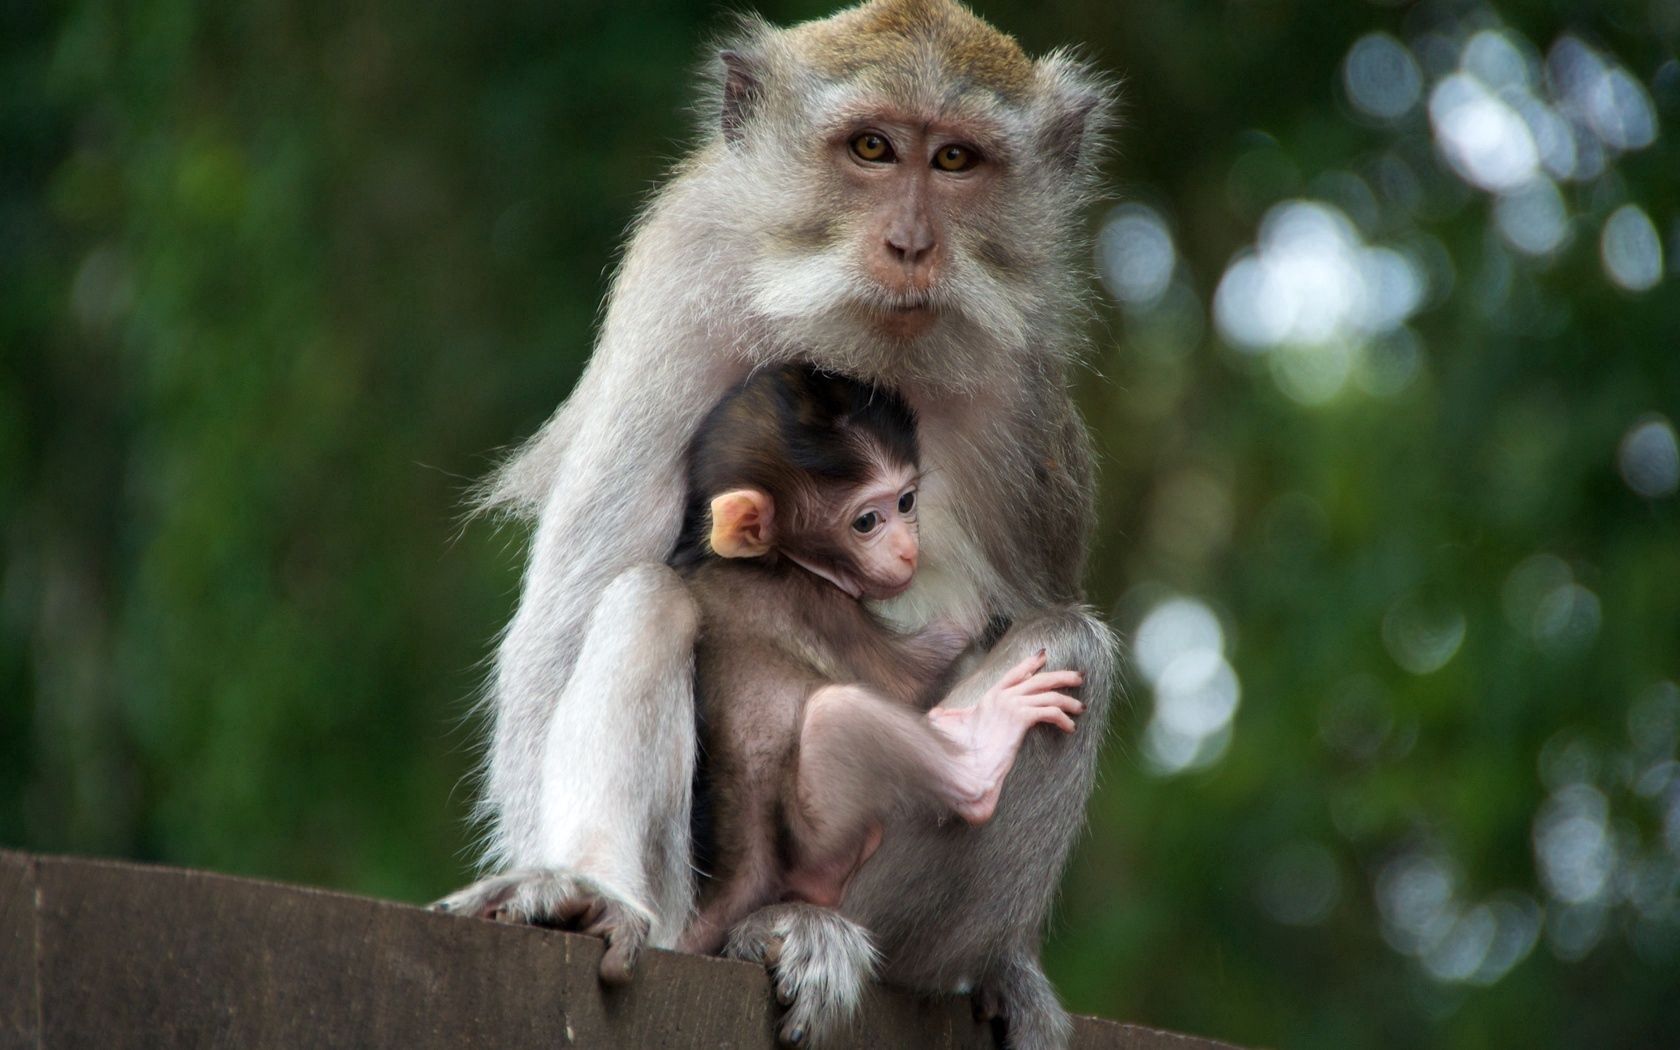 care, family, animals, young, monkey, joey, tenderness mobile wallpaper